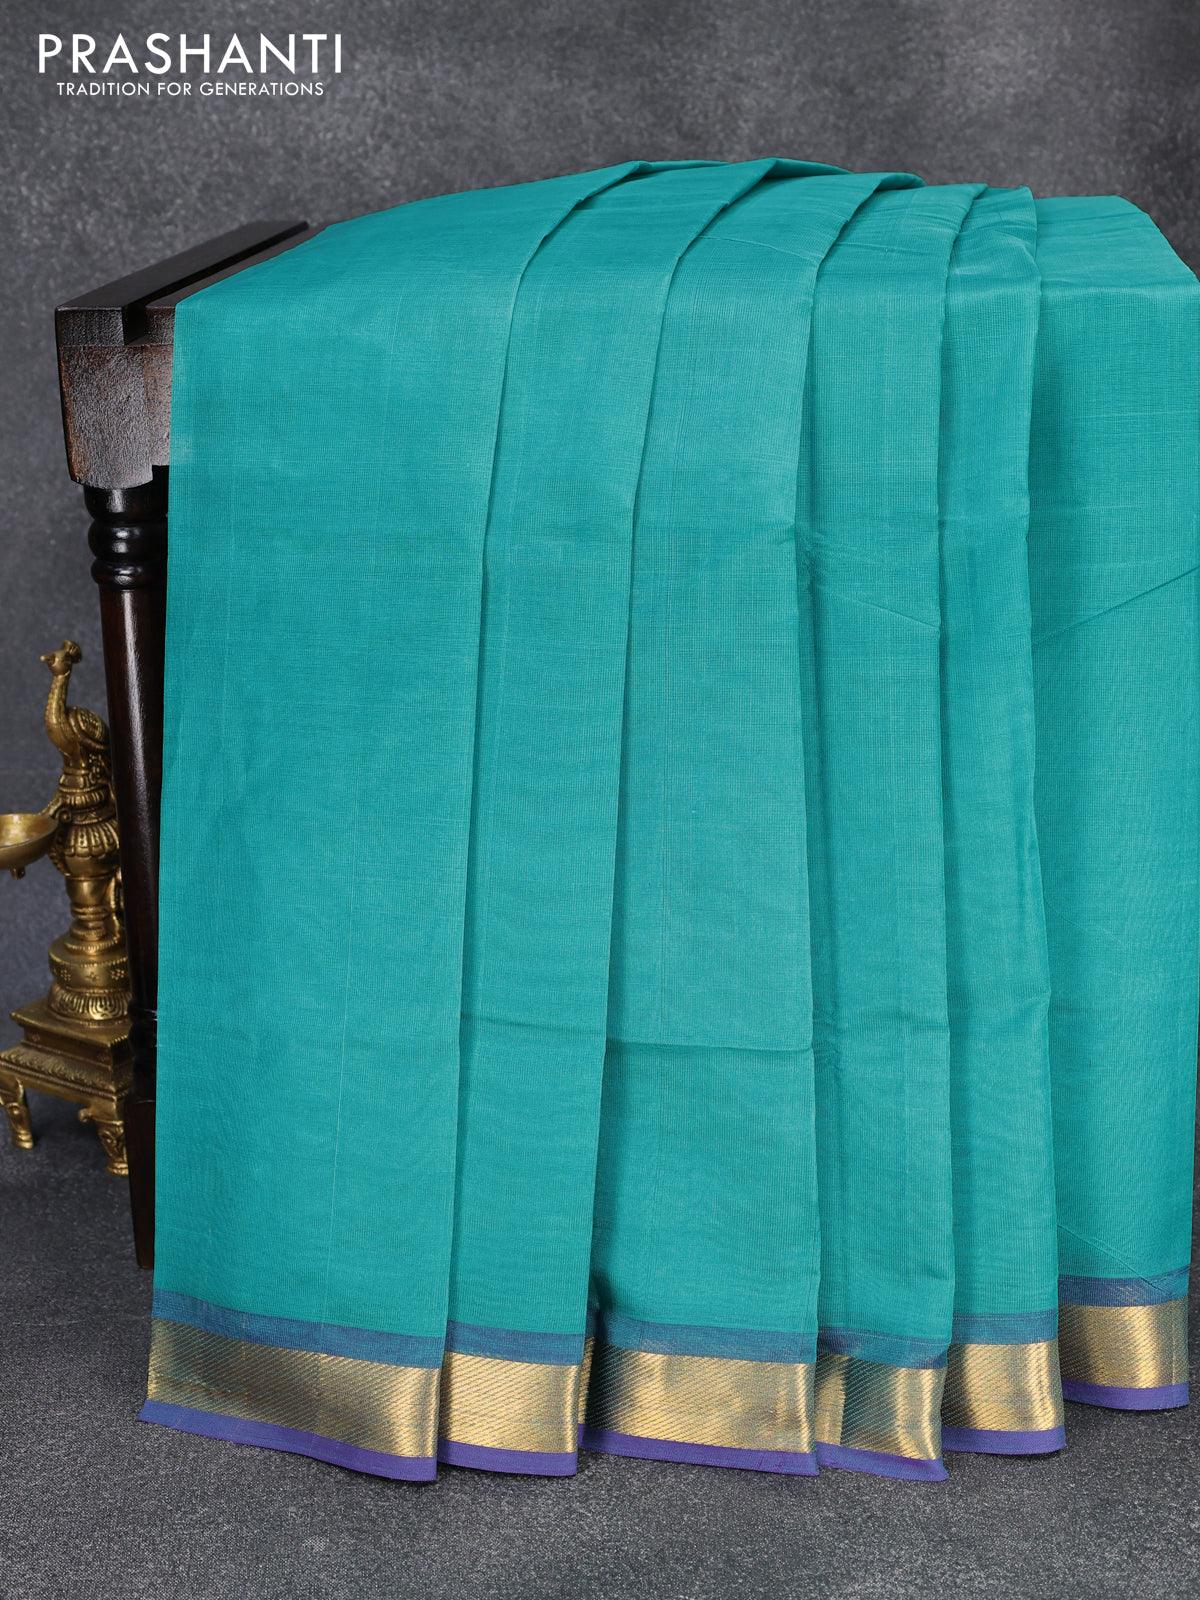 Buy cotton sarees with thread borders online at best price | Annamayil  Sarees